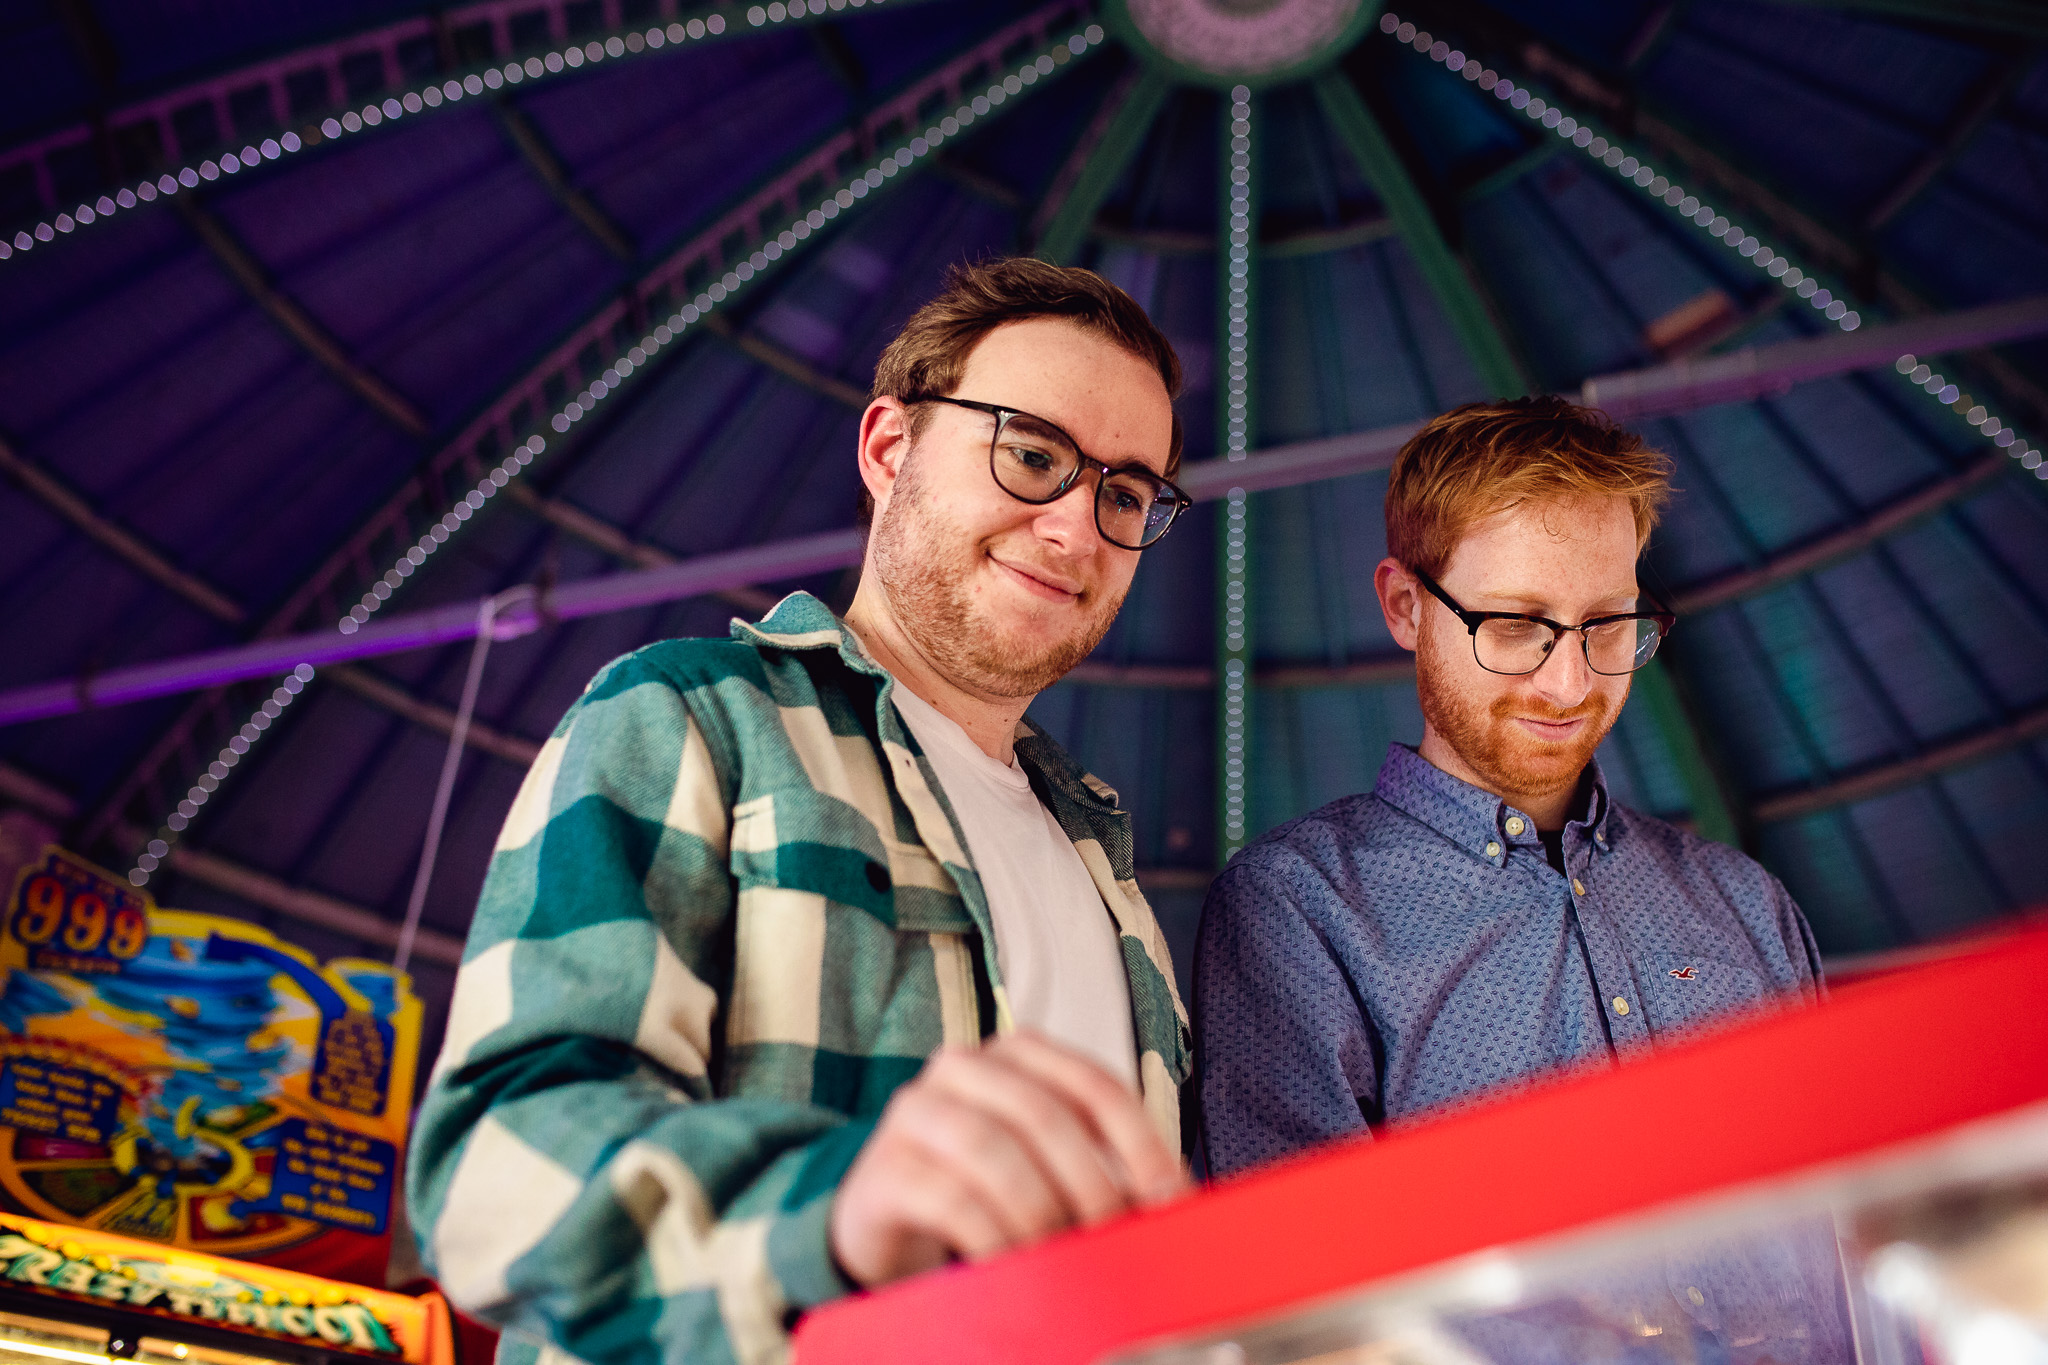 LGBTQ+ couple playing games at the arcade on Brighton pier during an engagement session